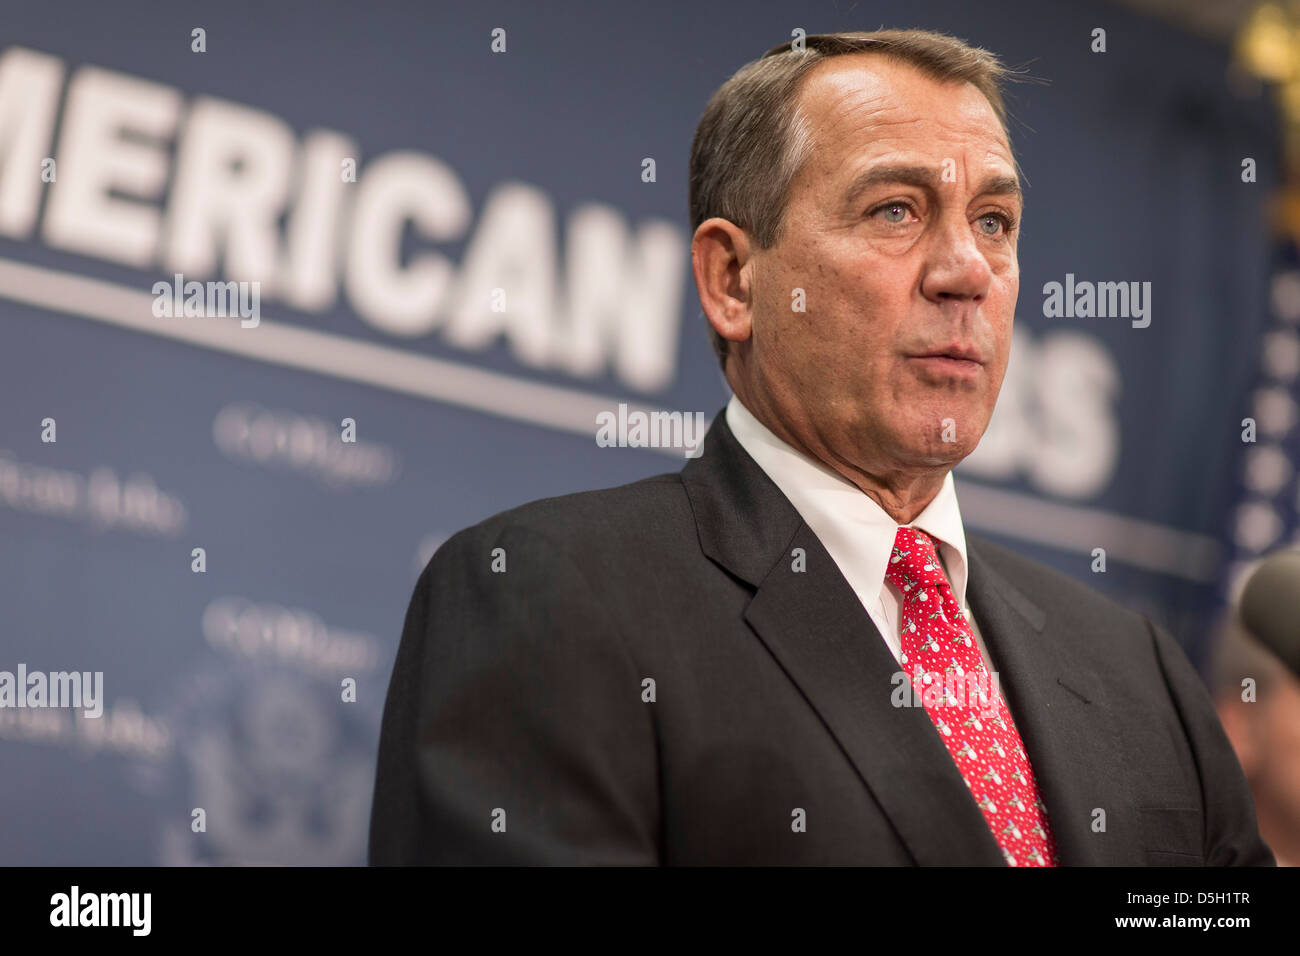 Speaker of the House John Boehner (R-OH) speaks at a press conference after a Republican caucus meeting on Capitol Hill. Stock Photo